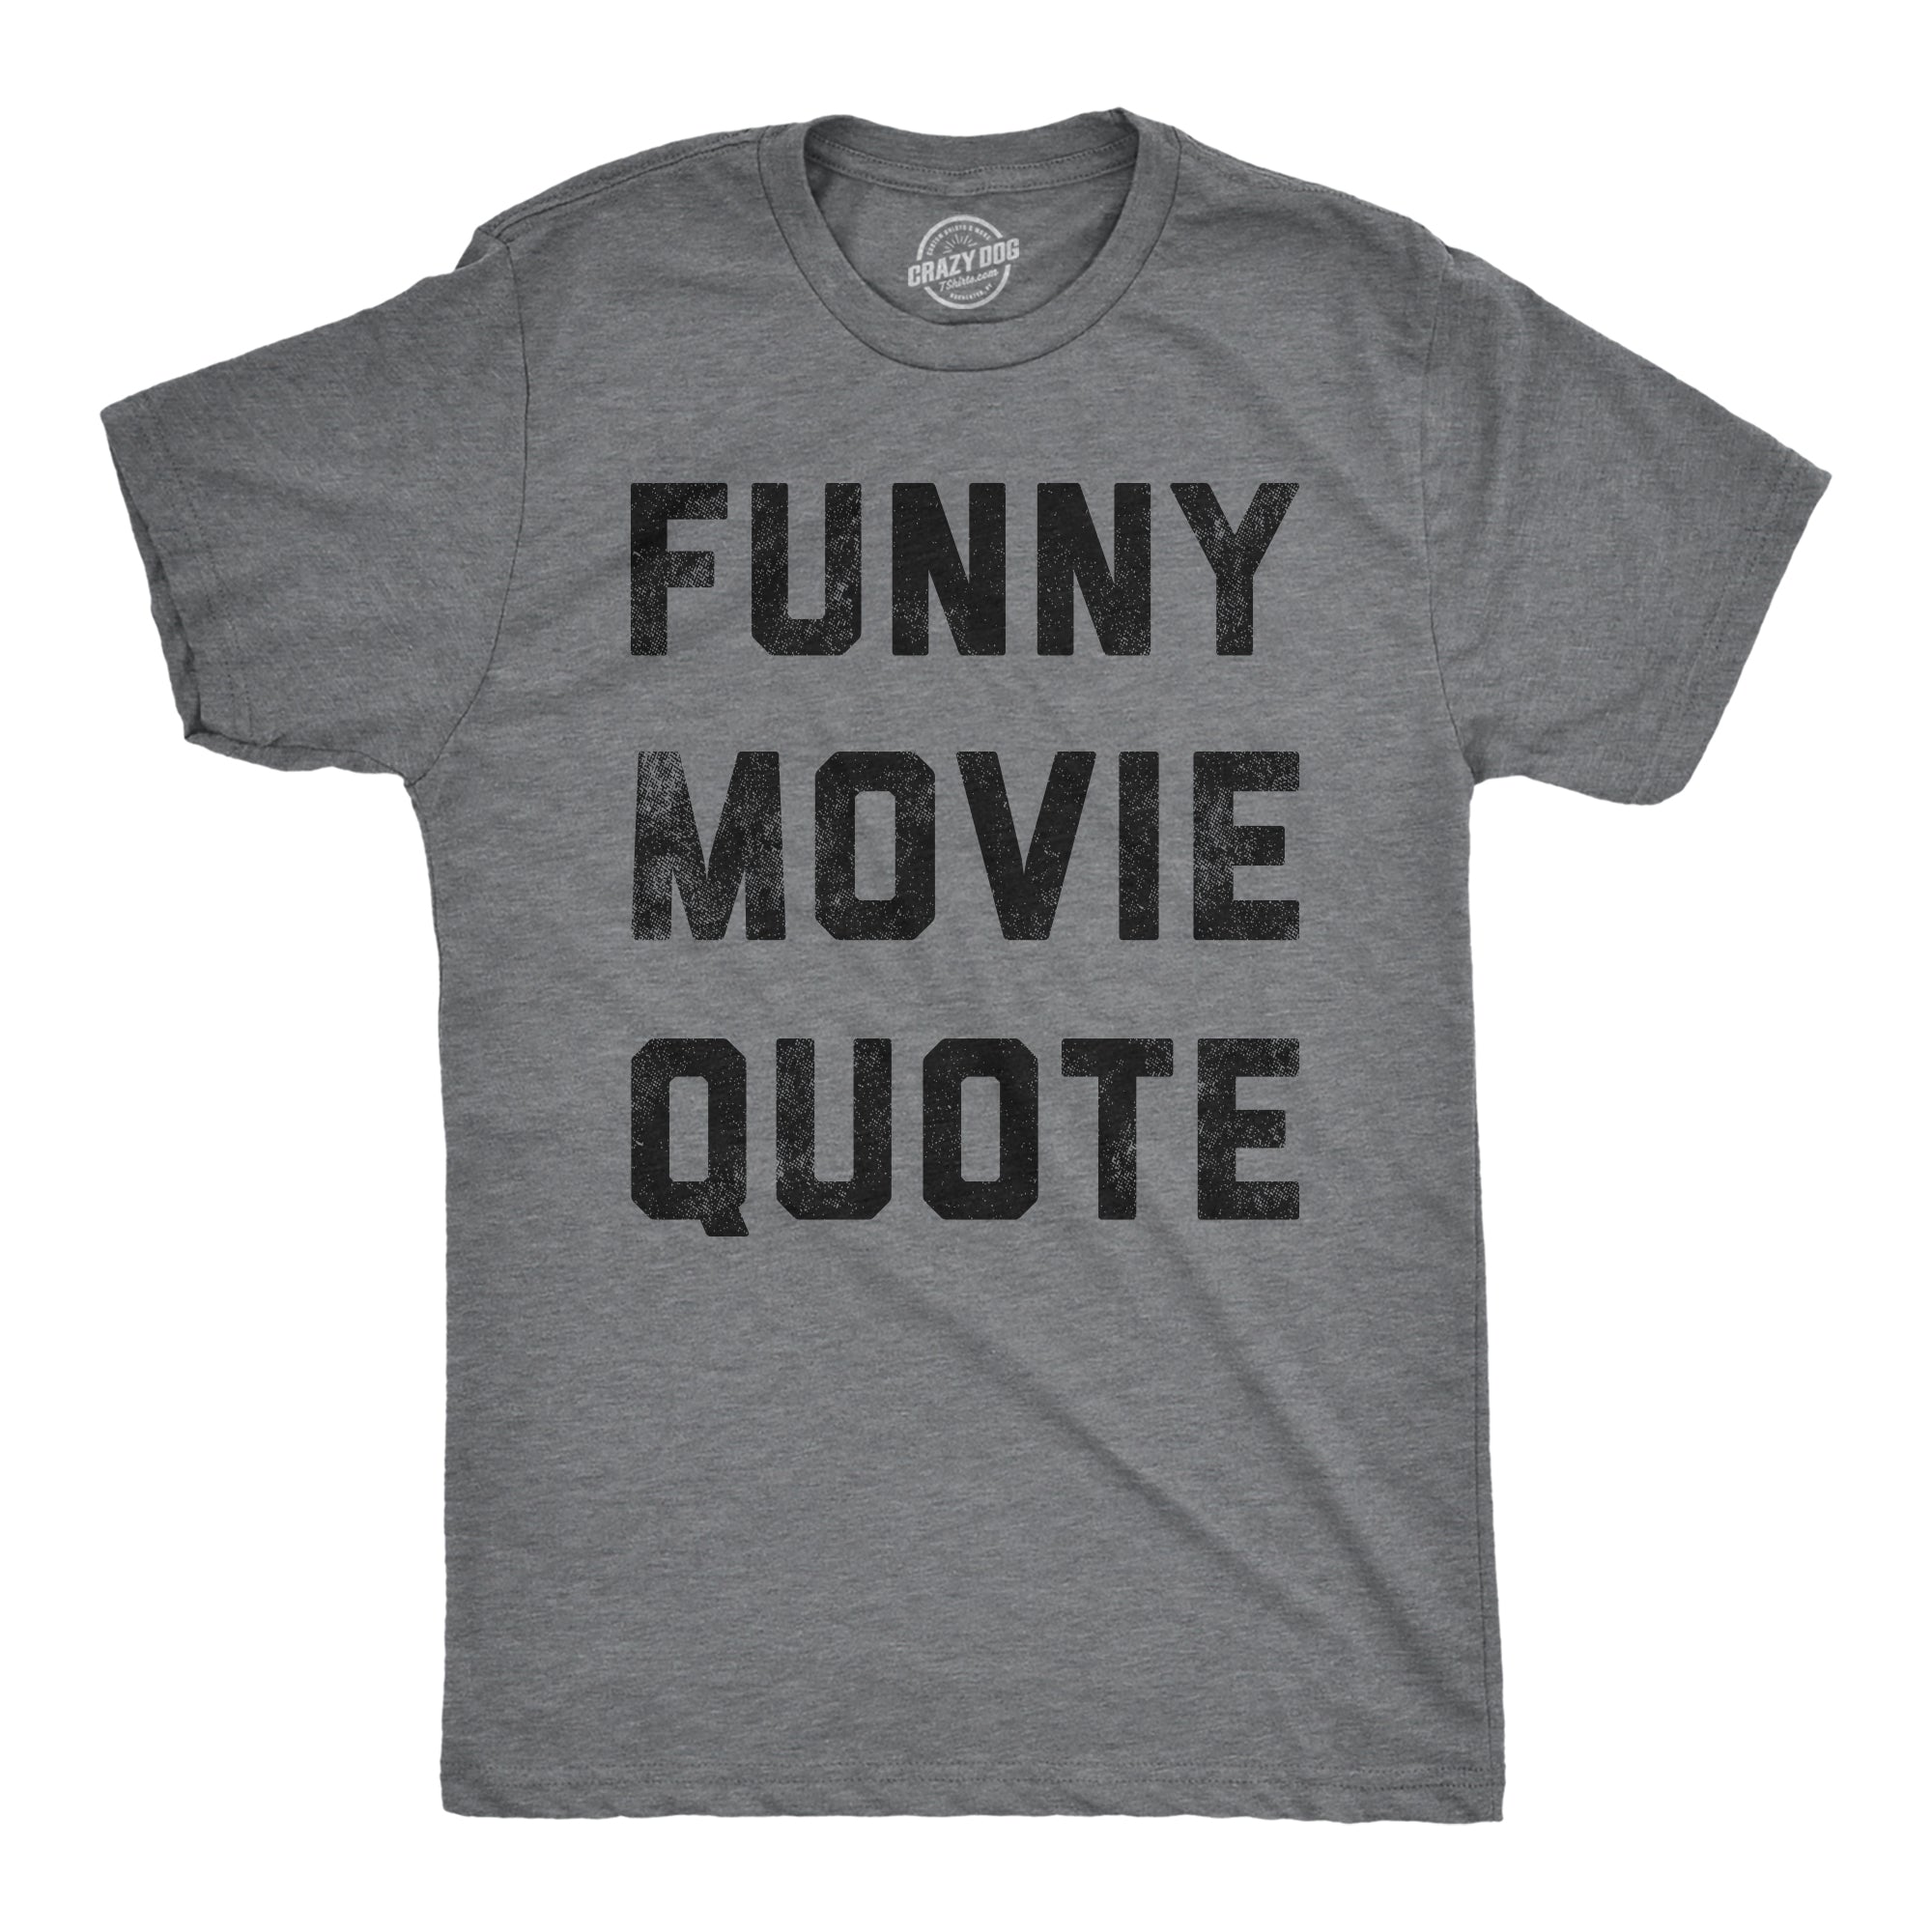 Funny Dark Heather Grey - Funny Movie Quote Funny Movie Quote Mens T Shirt Nerdy TV & Movies sarcastic Tee